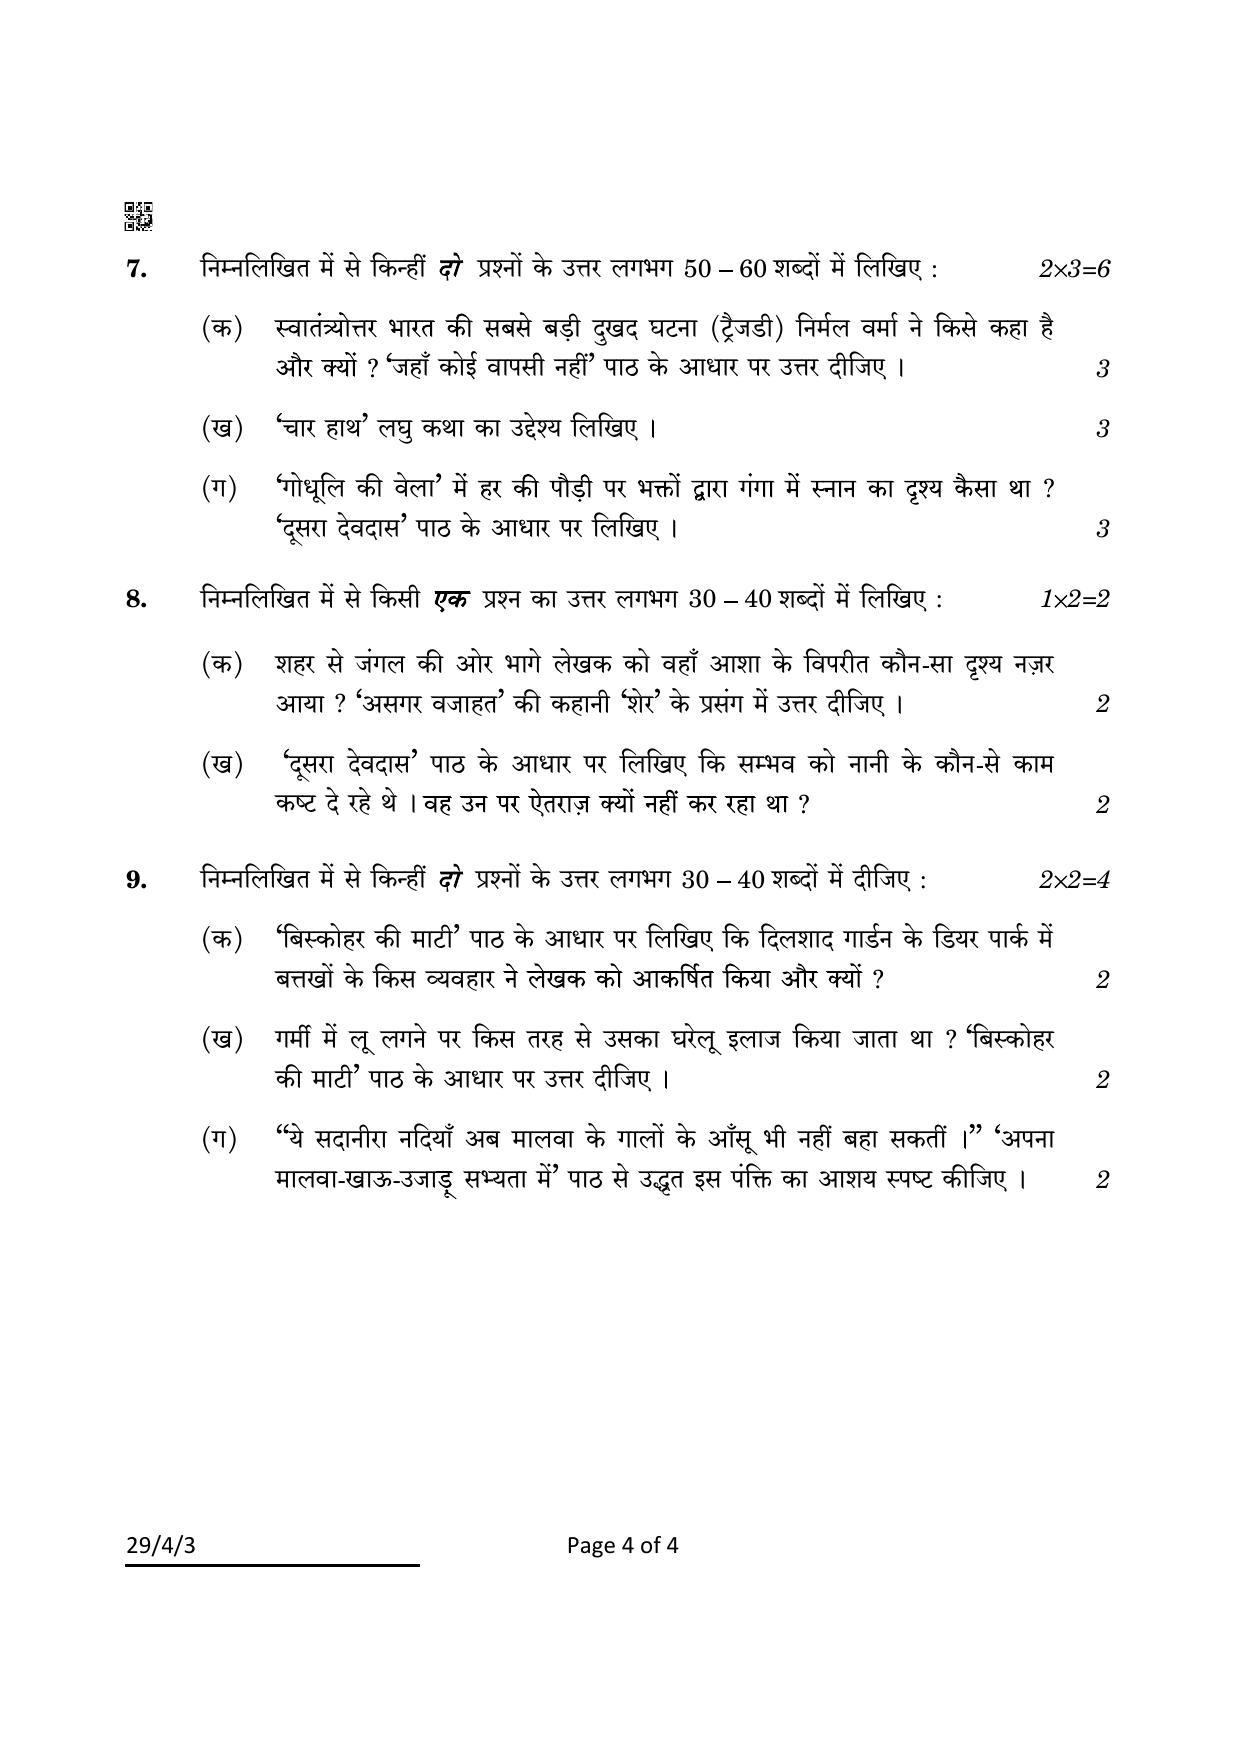 CBSE Class 12 29-4-3 Hindi Elective 2022 Question Paper - Page 4